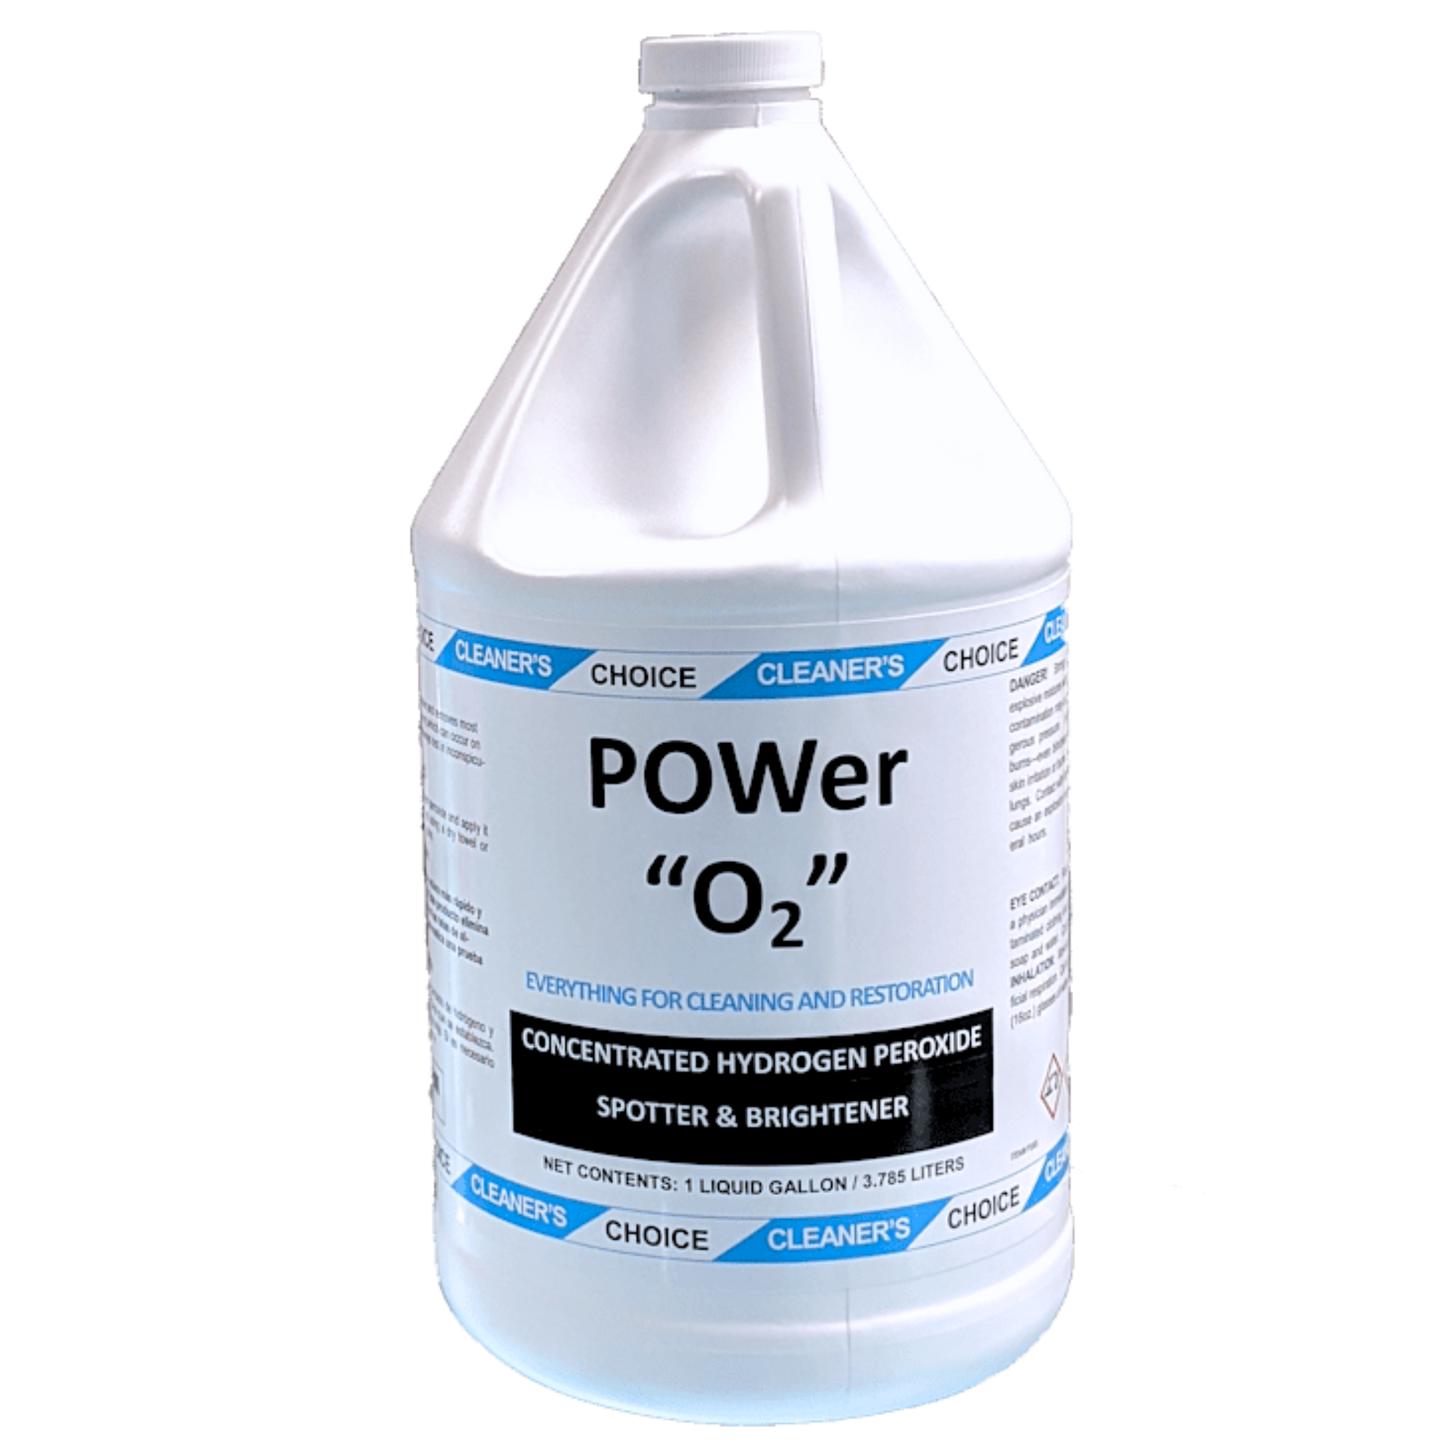 POWer O2, 19.5% Hydrogen Peroxide Brightener and Stain Remover (1 gal)